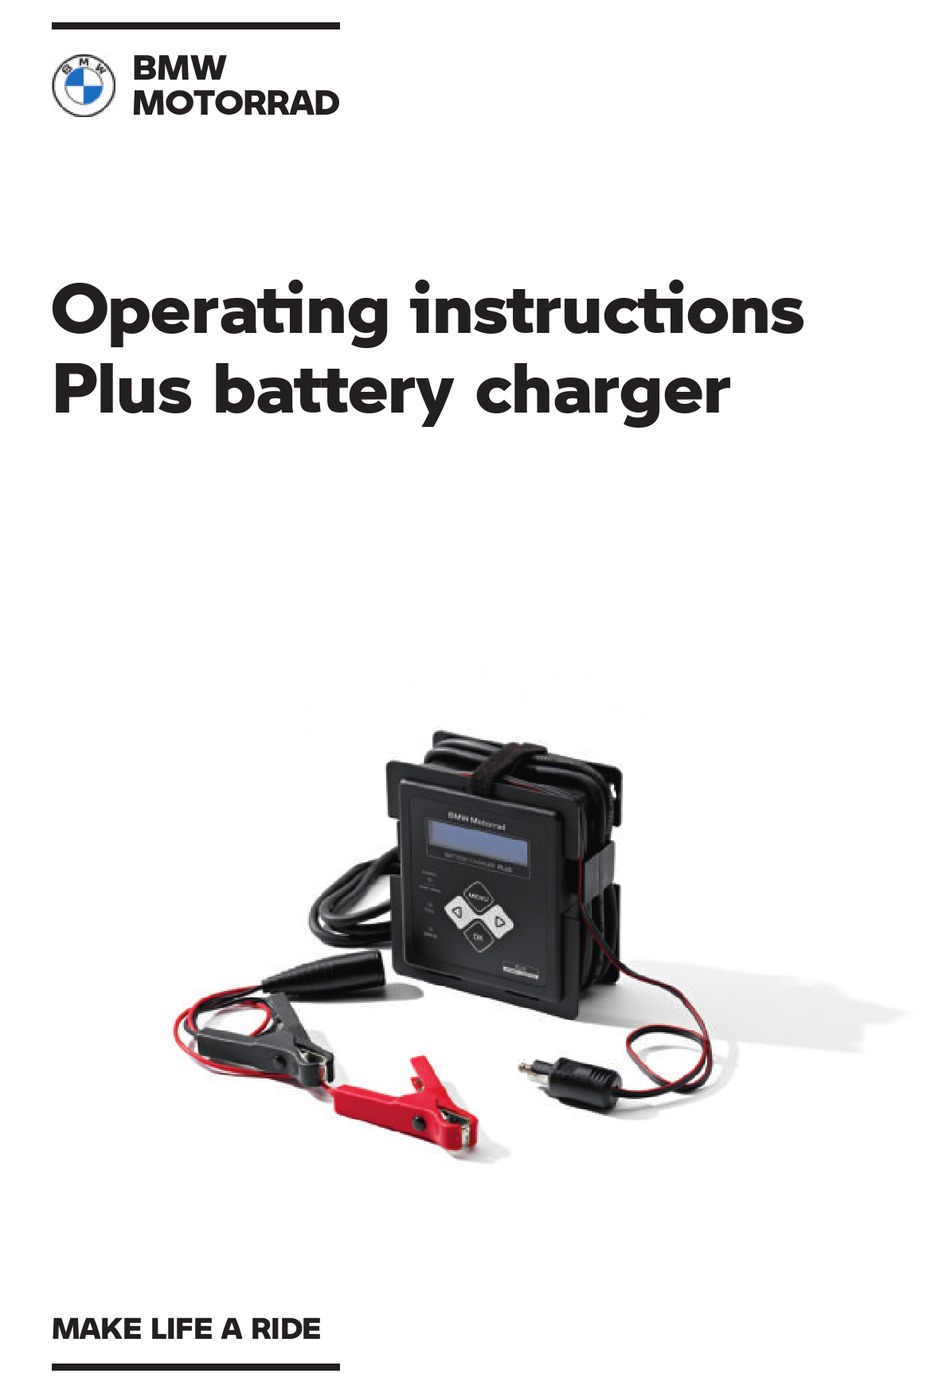 BMW MOTORRAD PLUS BATTERY CHARGER OPERATING INSTRUCTIONS MANUAL Pdf